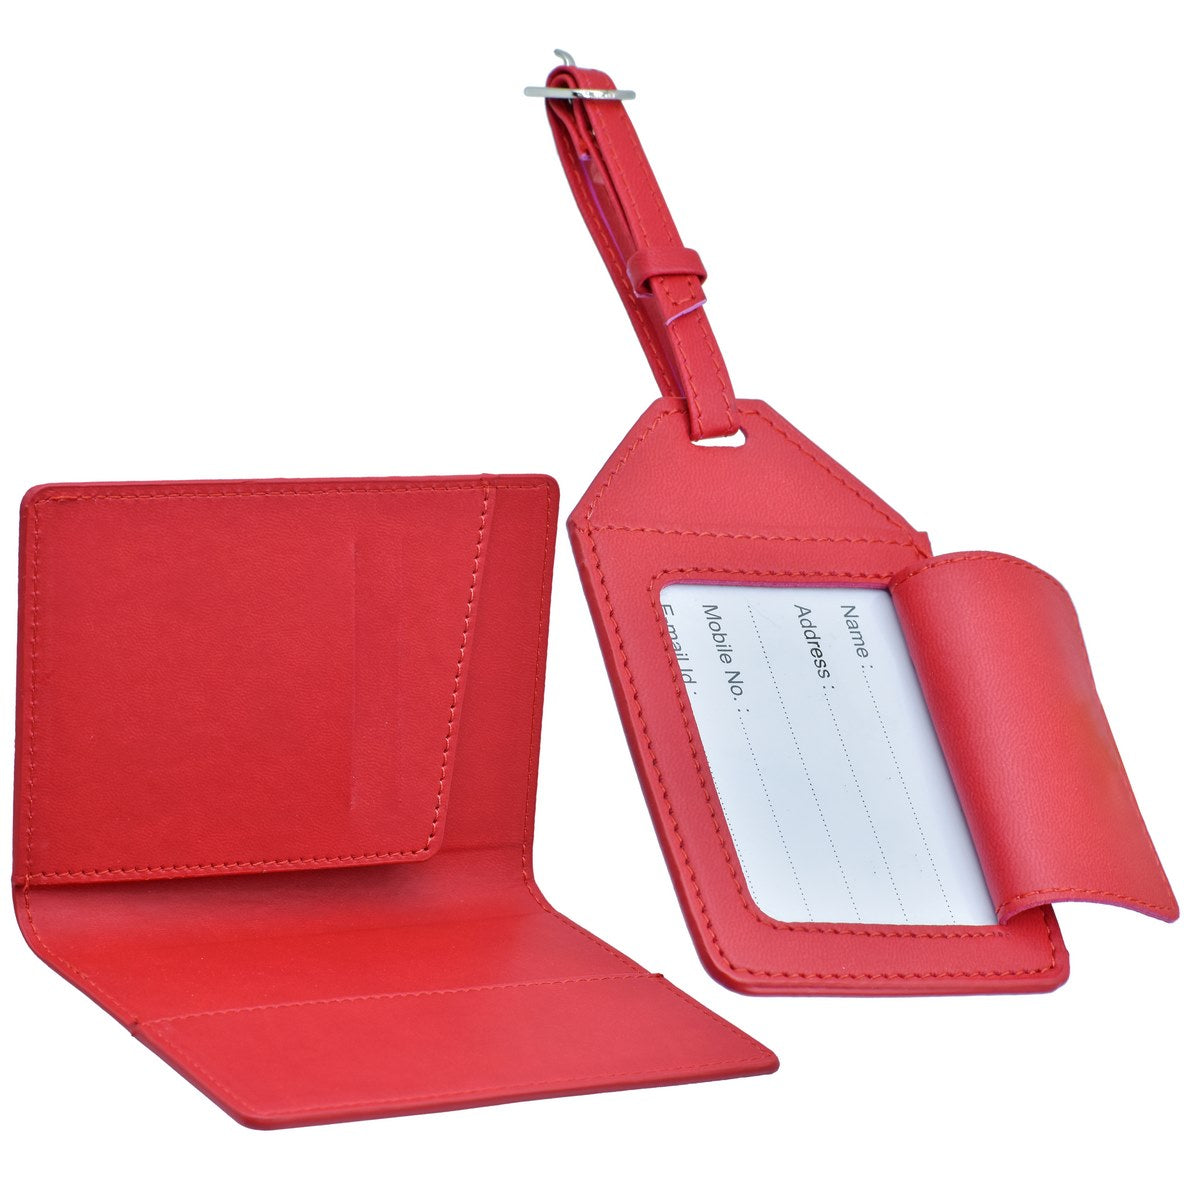 jags-mumbai Household Goods "Travel in Style with the 2-in-1 Passport Holder and Luggage Tag Set in Red"